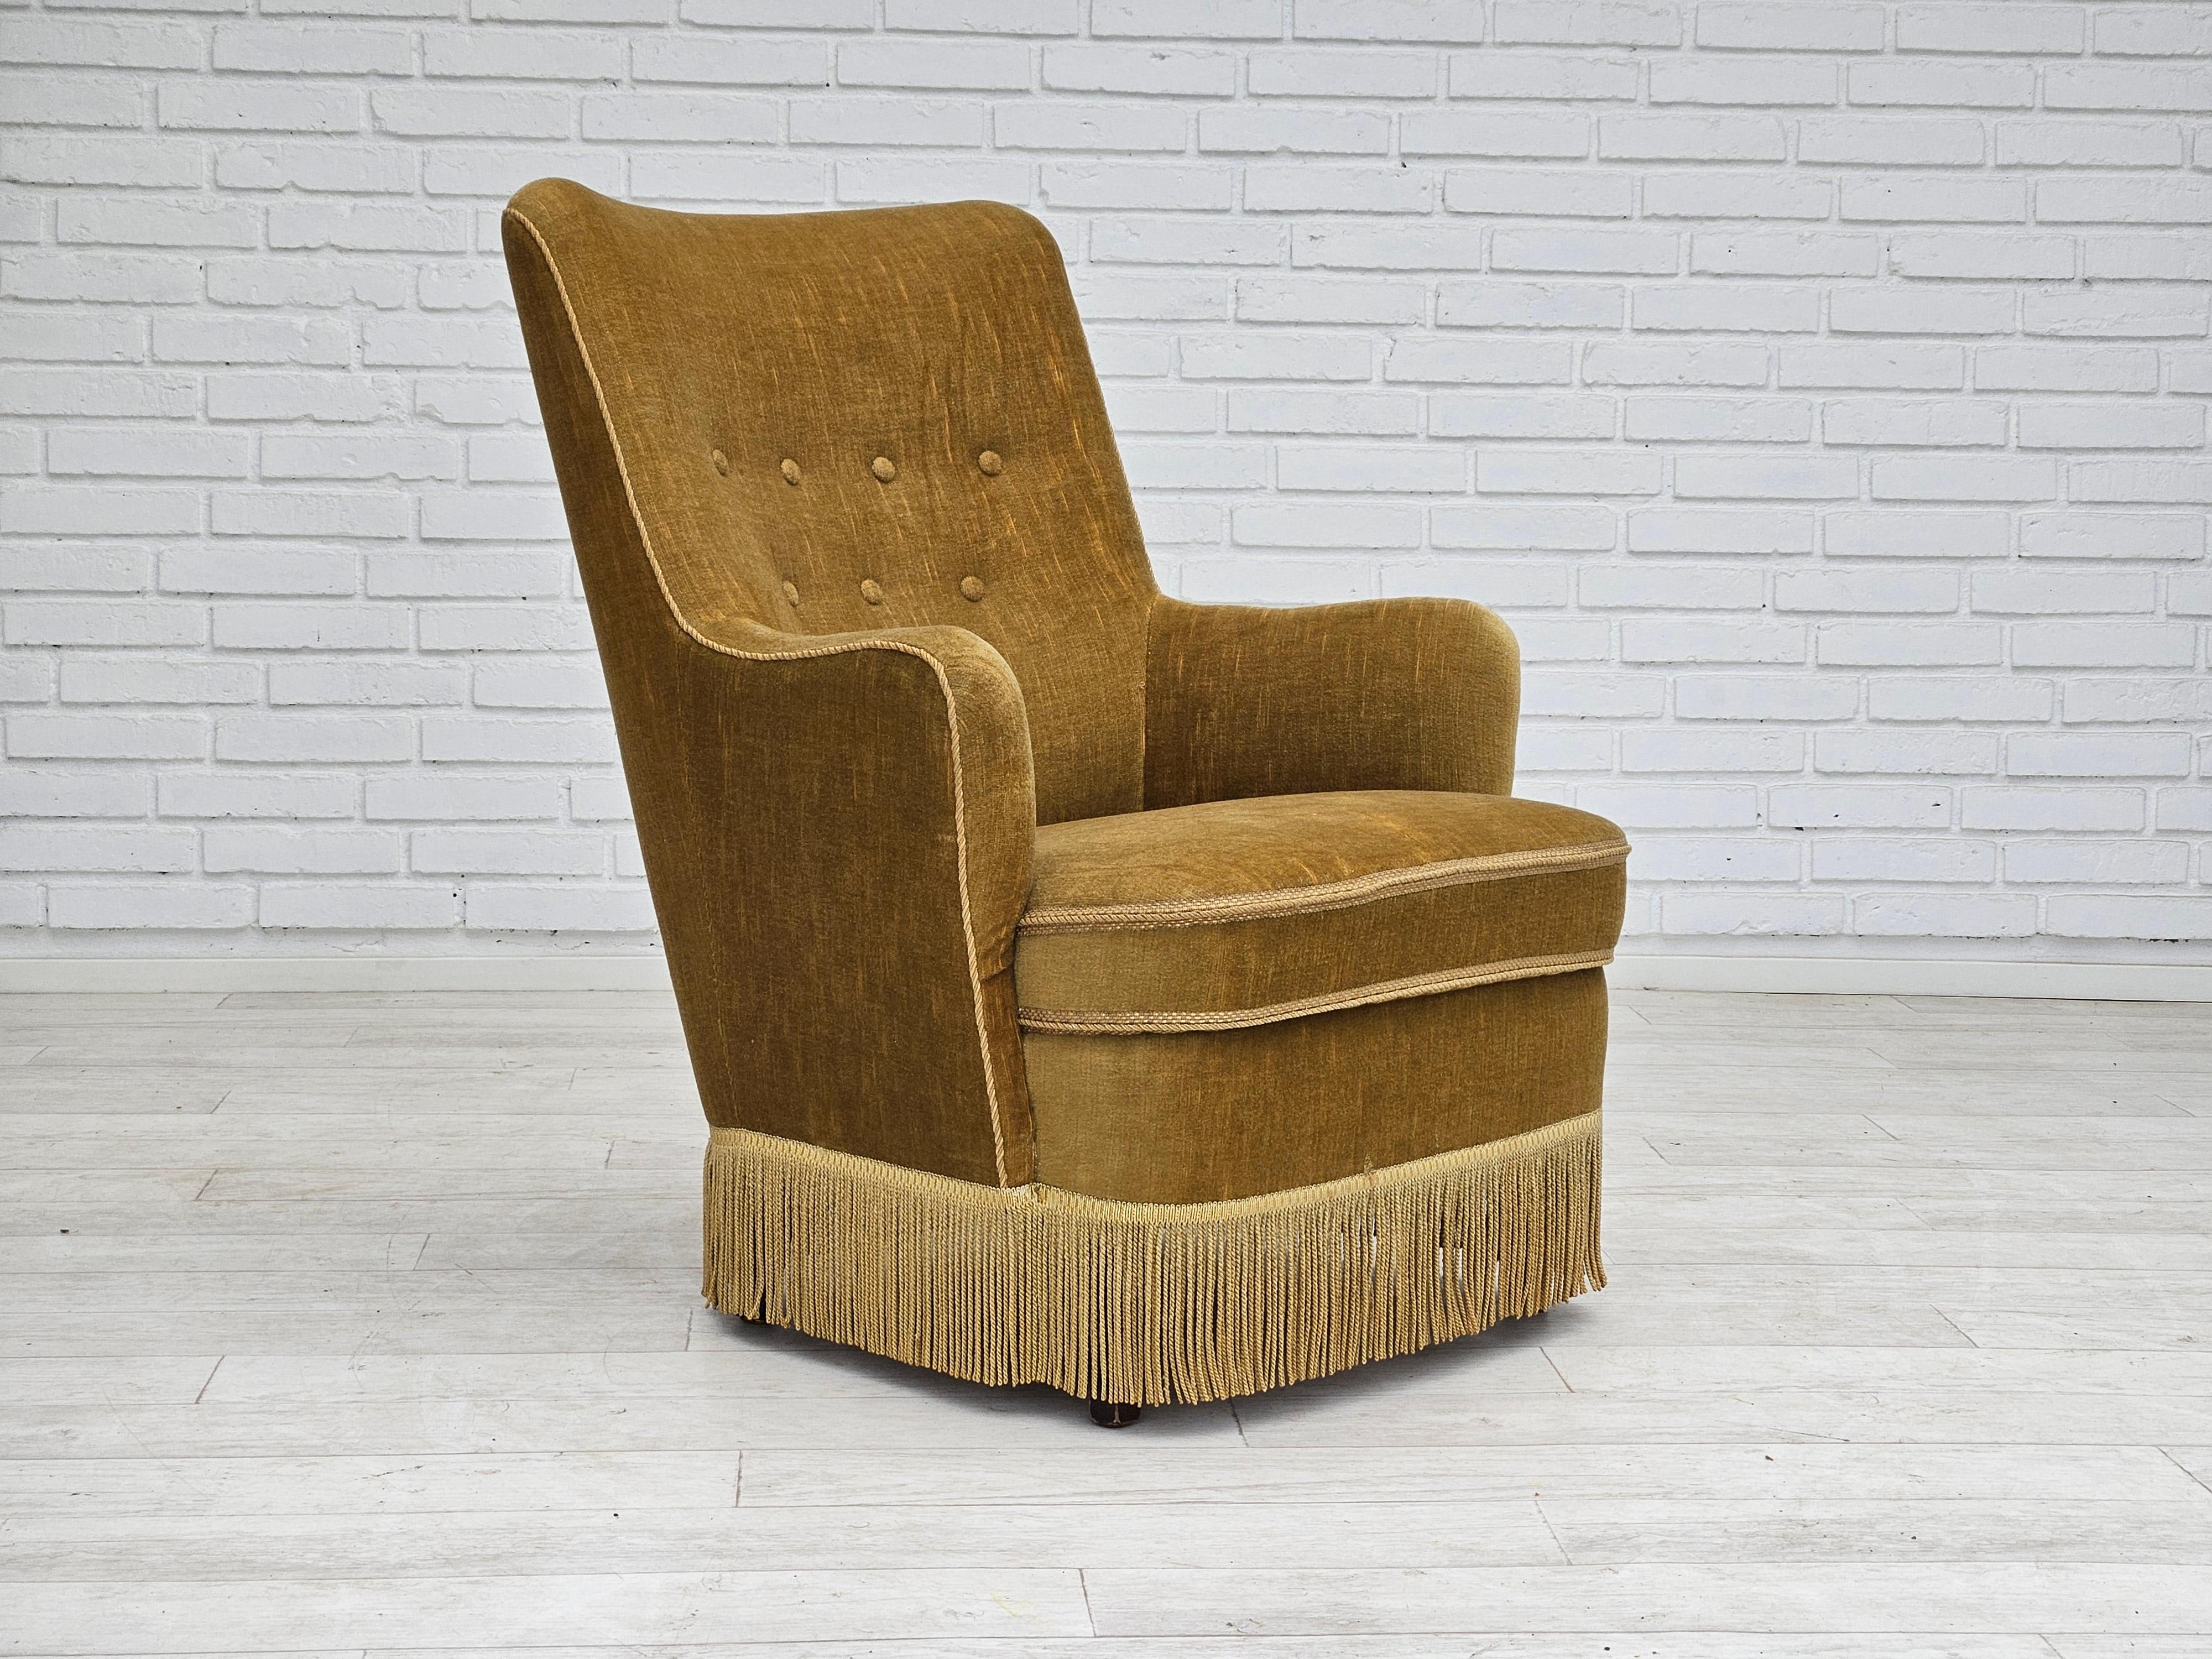 1960s, Danish armchair in light green velour. Original very good condition: no smells and no stains. Beech wood legs. Springs in the seat. Manufactured by a Danish furniture manufacturer in about 1960.